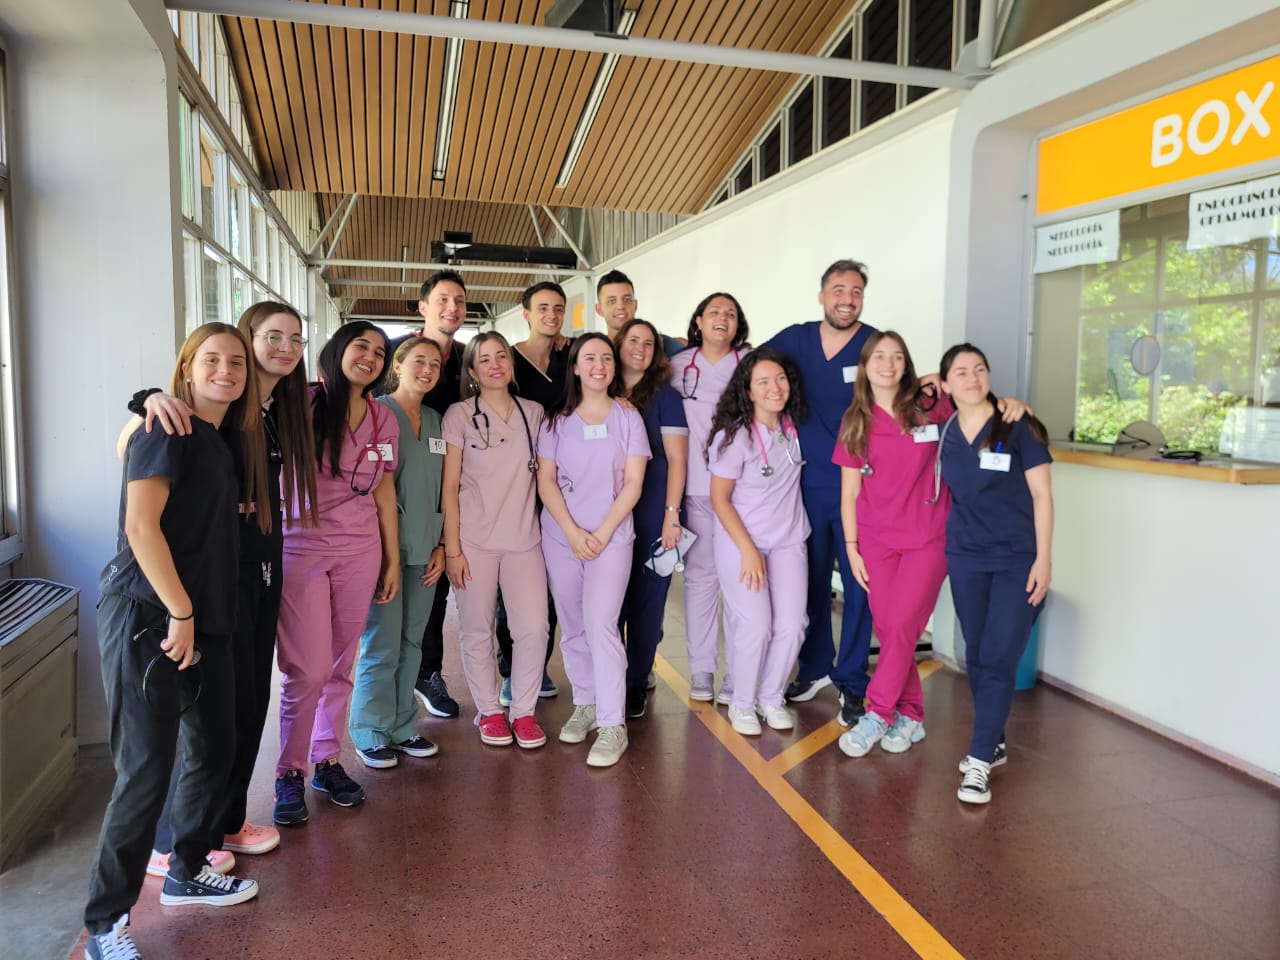 Fifteen new medical professionals have passed the OSCE::Canal Verte